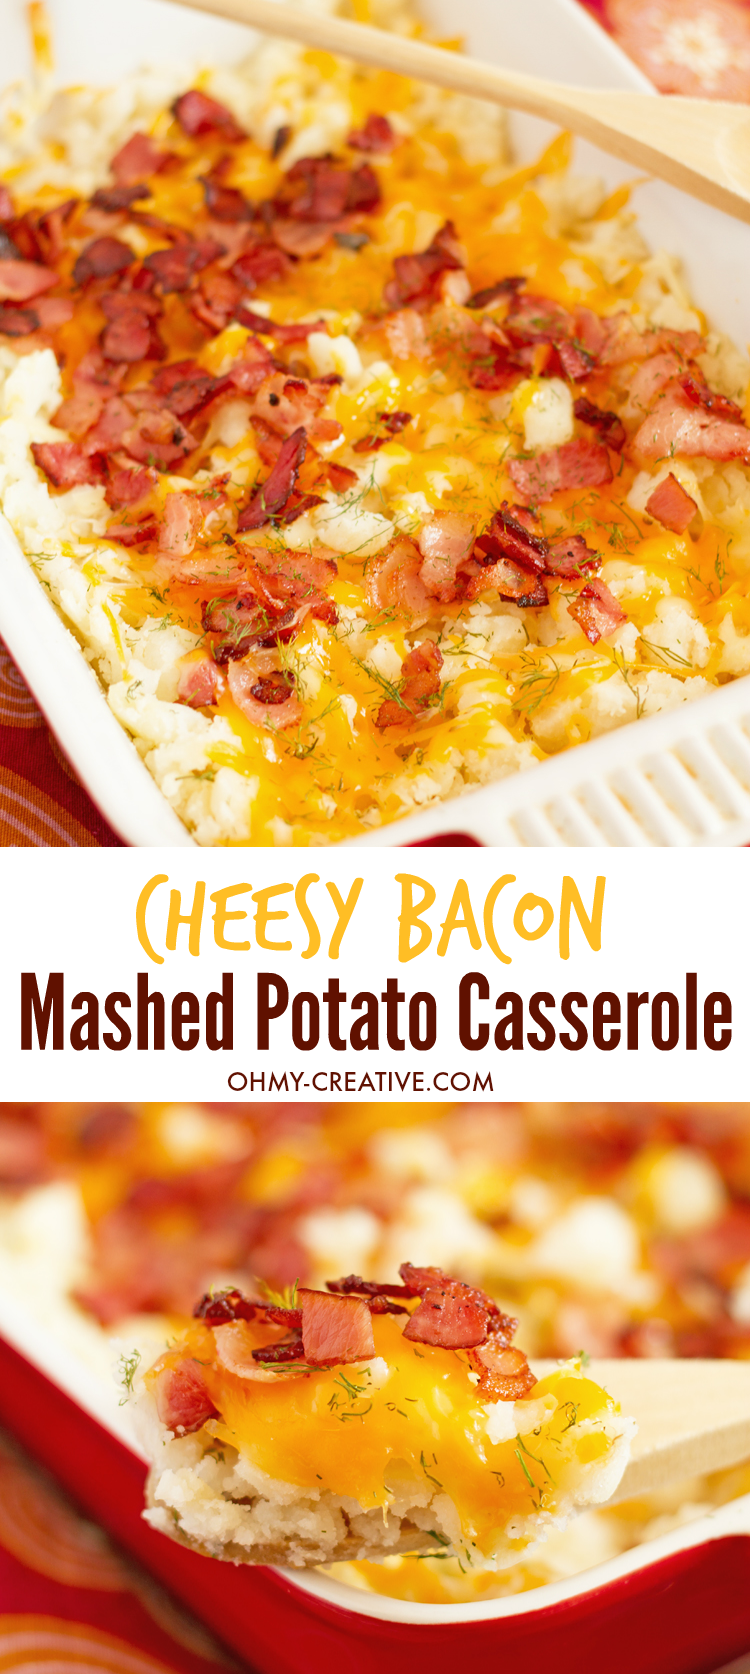 Colby Jack Cheese and Bacon Mashed Potato Casserole - Easy loaded mashed potatoes recipe with Colby-Jack cheese and dill. Perfect for weeknight dinners or parties and easy to prepare! OH-MY CREATIVE.COM